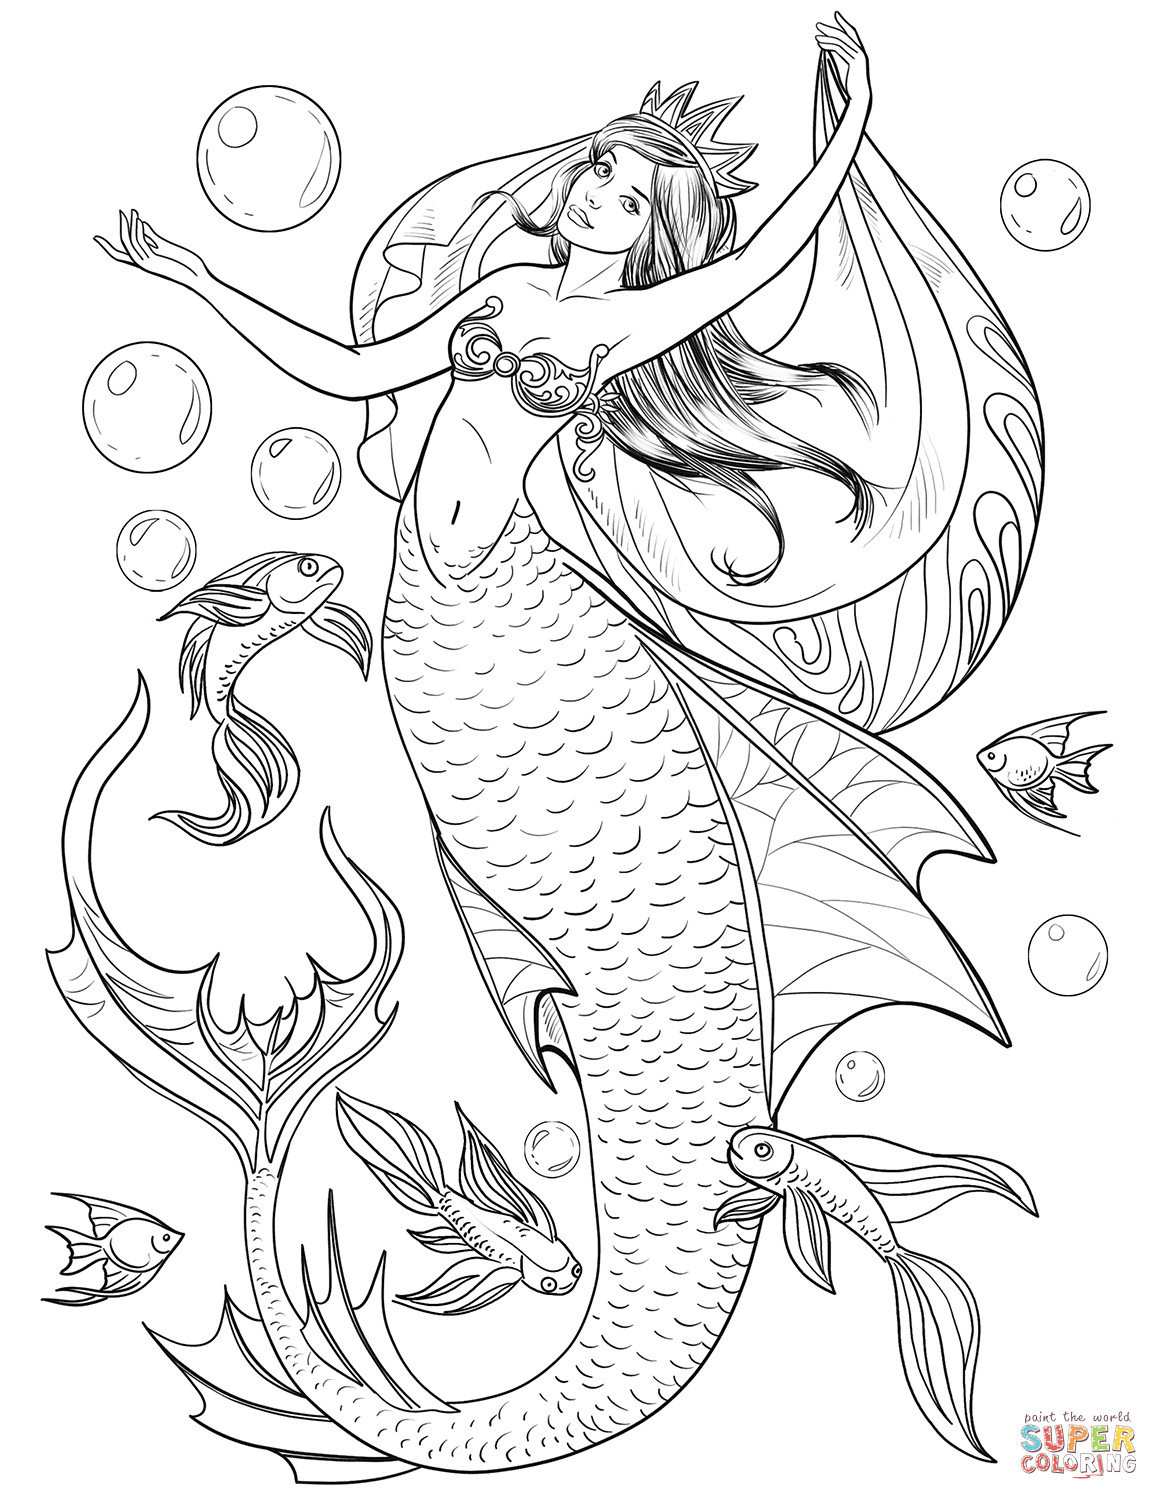 Mermaid Coloring Pages For Toddlers
 Mermaid coloring page